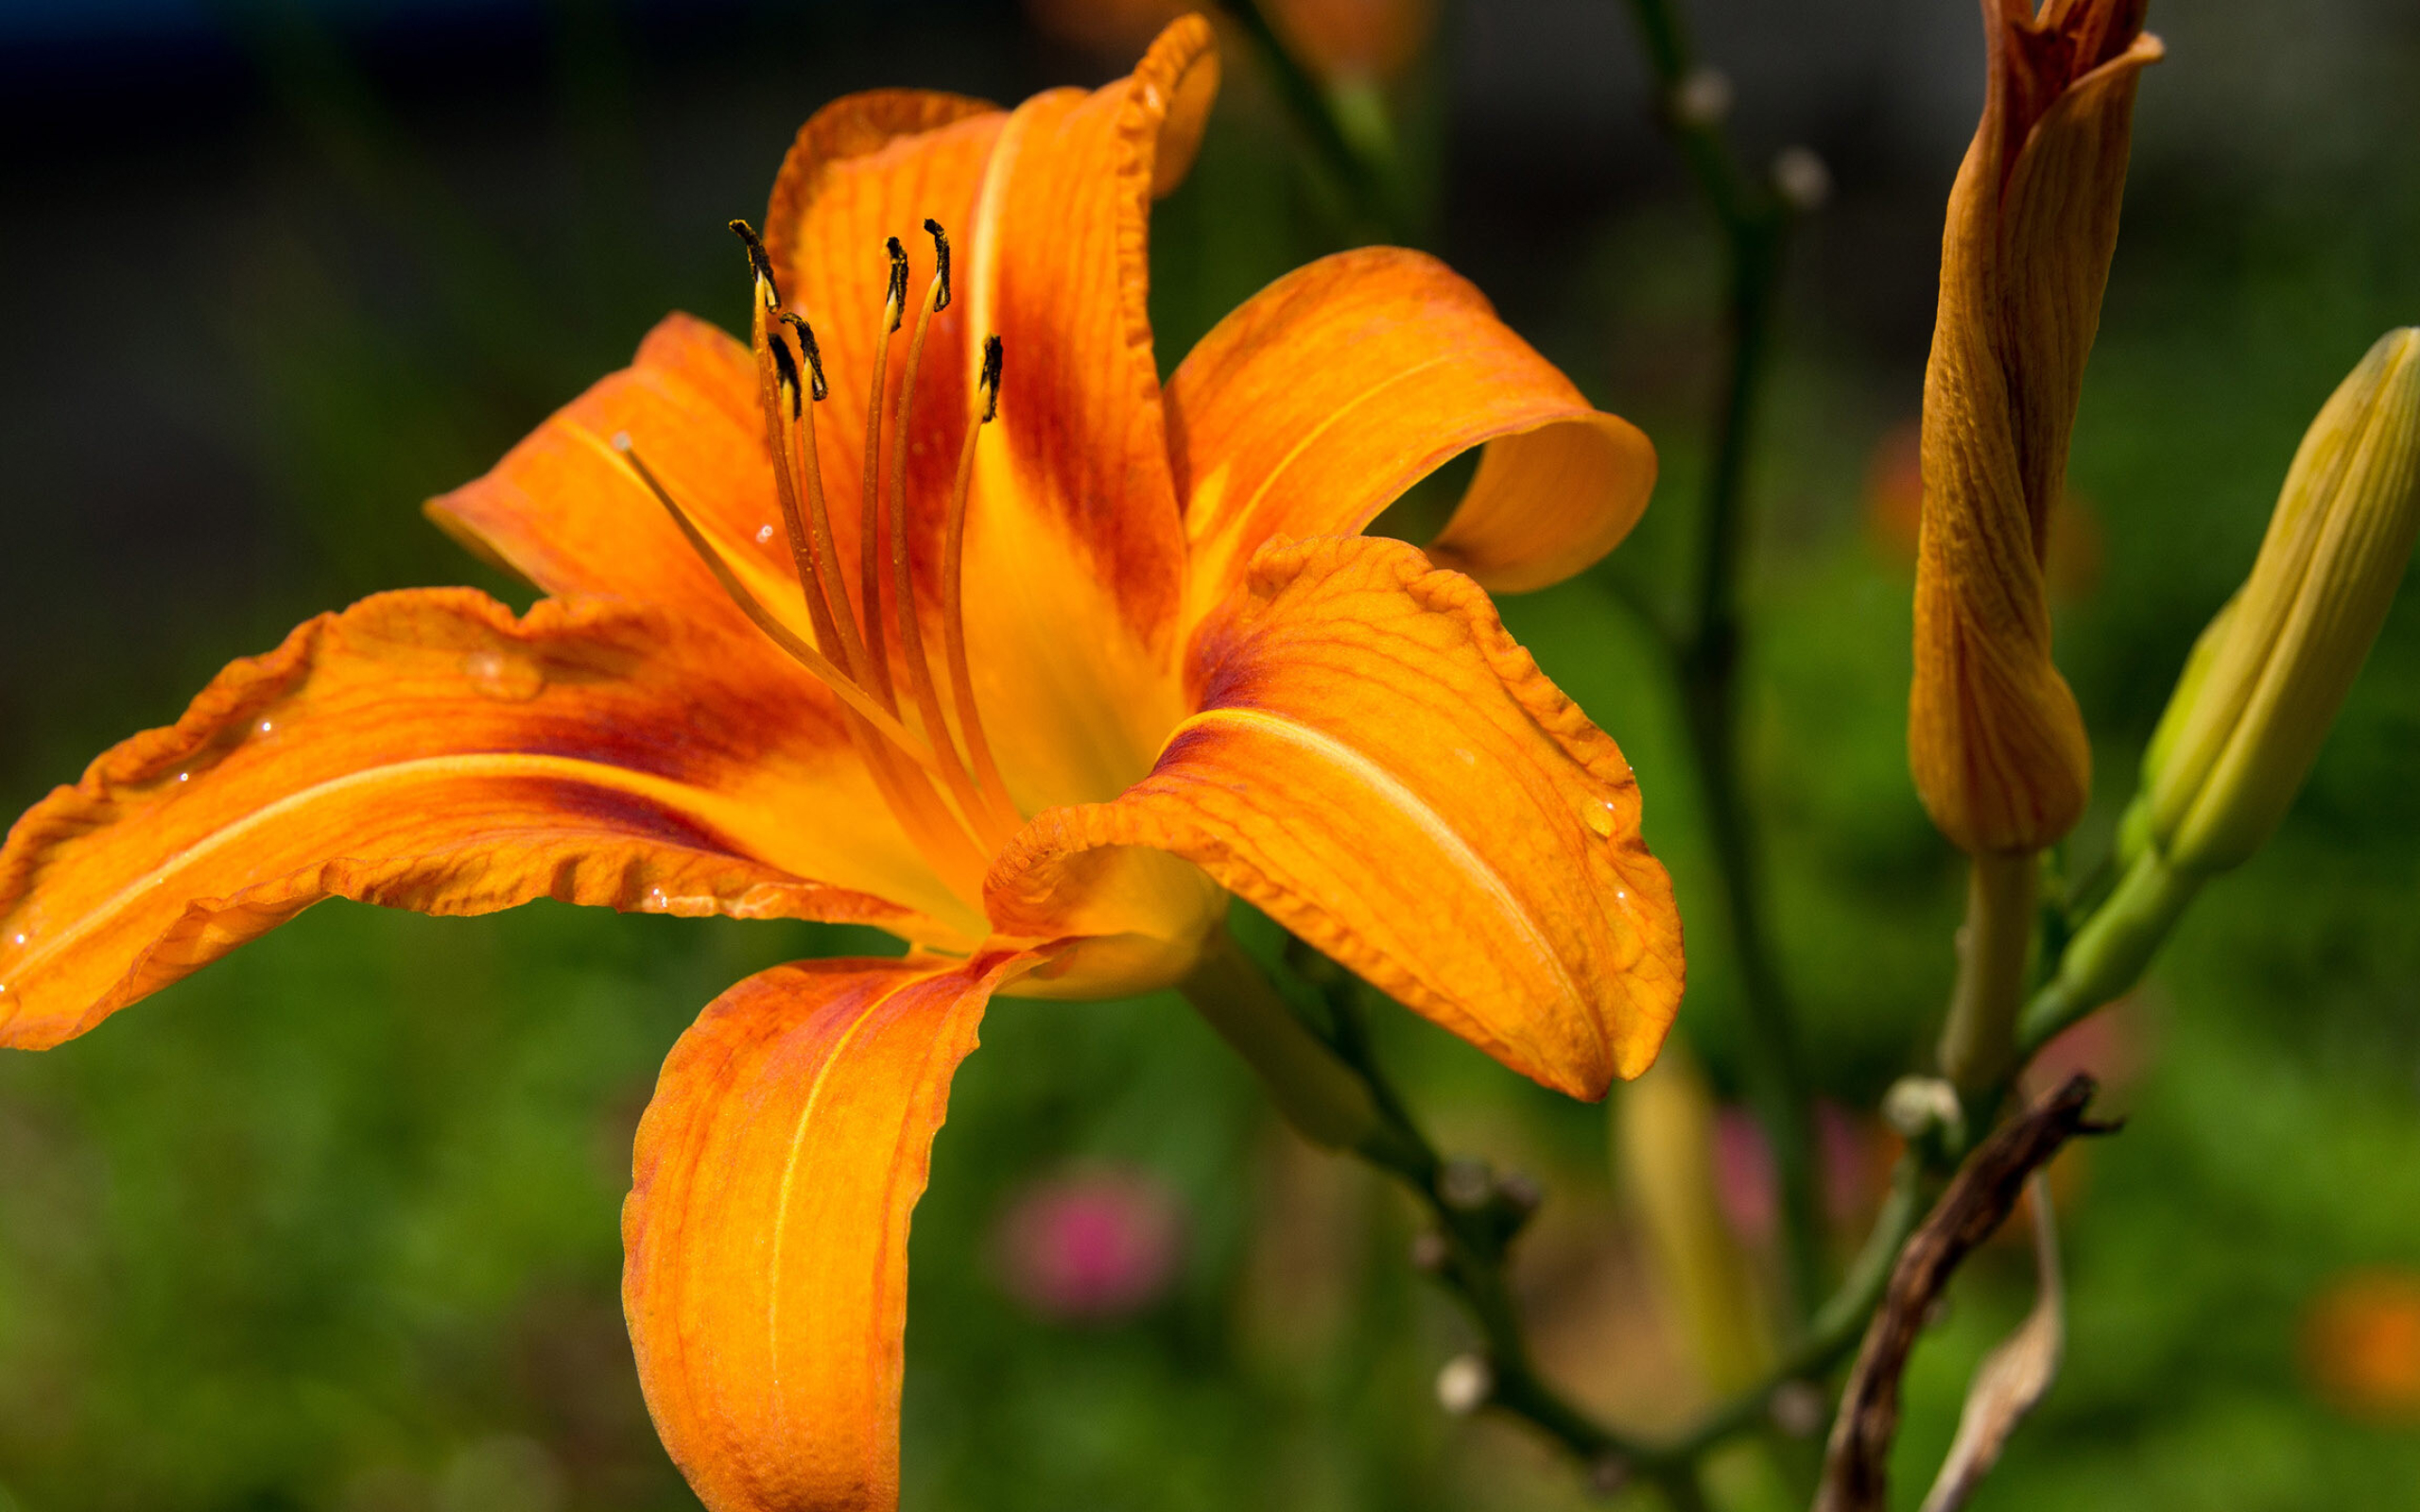 Orange lily, Flower wallpapers, Bright and bold, Nature, 2560x1600 HD Desktop